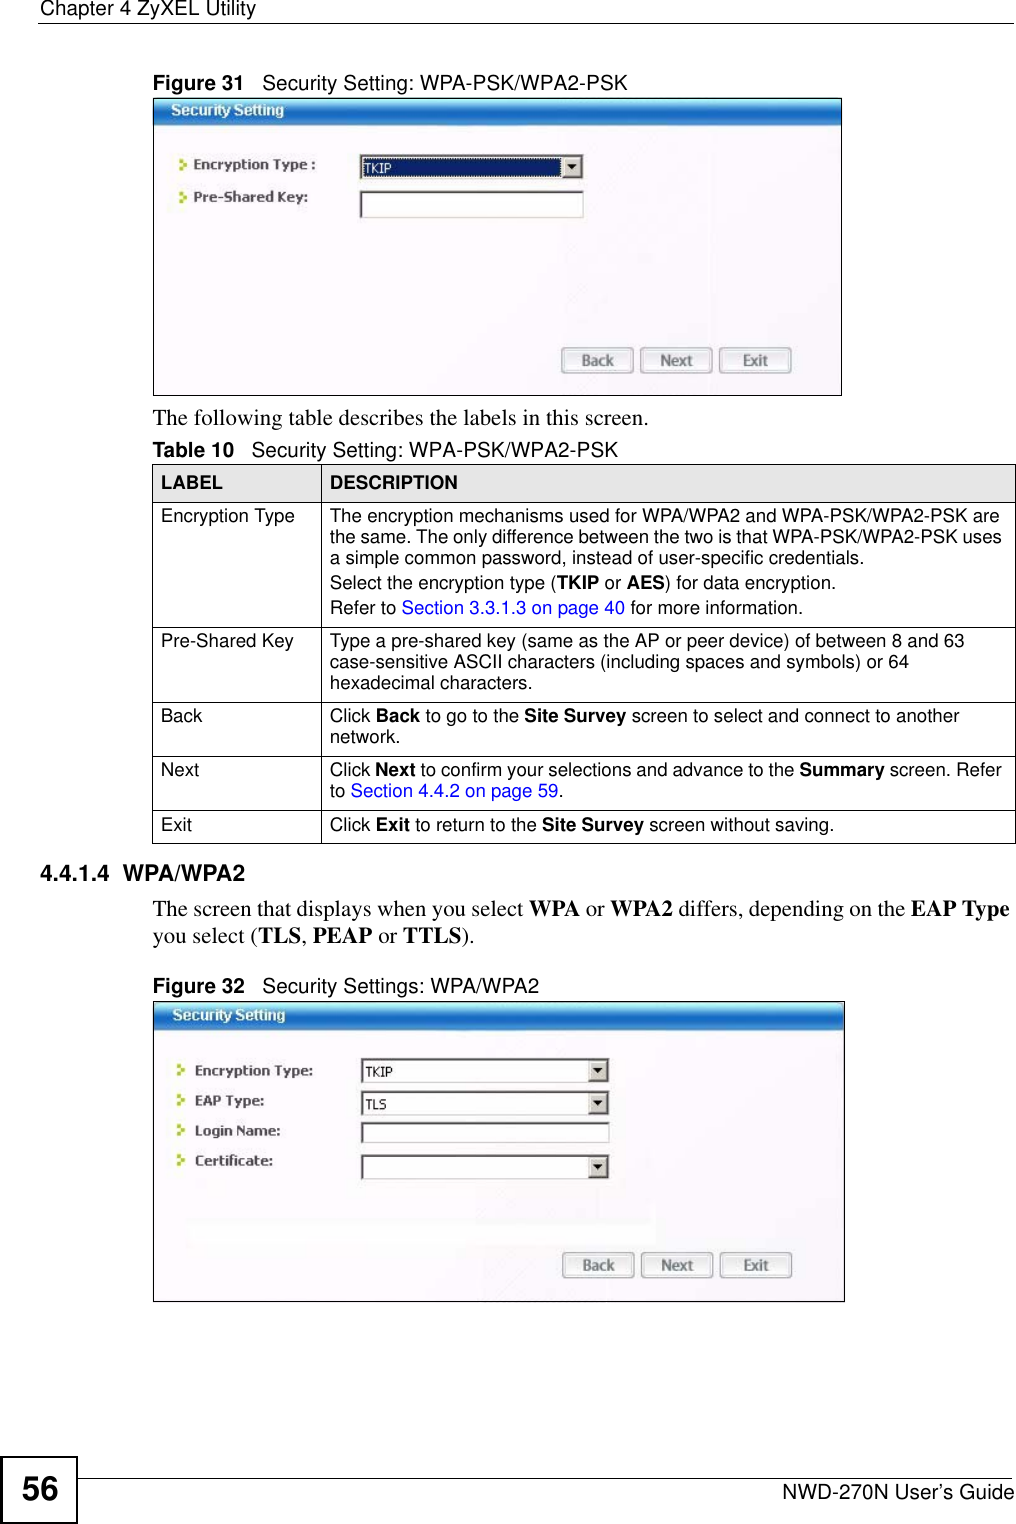 Chapter 4 ZyXEL UtilityNWD-270N User’s Guide56Figure 31   Security Setting: WPA-PSK/WPA2-PSKThe following table describes the labels in this screen. 4.4.1.4  WPA/WPA2The screen that displays when you select WPA or WPA2 differs, depending on the EAP Type you select (TLS, PEAP or TTLS).Figure 32   Security Settings: WPA/WPA2 Table 10   Security Setting: WPA-PSK/WPA2-PSKLABEL DESCRIPTIONEncryption Type The encryption mechanisms used for WPA/WPA2 and WPA-PSK/WPA2-PSK are the same. The only difference between the two is that WPA-PSK/WPA2-PSK uses a simple common password, instead of user-specific credentials.Select the encryption type (TKIP or AES) for data encryption.Refer to Section 3.3.1.3 on page 40 for more information.Pre-Shared Key Type a pre-shared key (same as the AP or peer device) of between 8 and 63 case-sensitive ASCII characters (including spaces and symbols) or 64 hexadecimal characters.Back Click Back to go to the Site Survey screen to select and connect to another network.Next Click Next to confirm your selections and advance to the Summary screen. Refer to Section 4.4.2 on page 59. Exit Click Exit to return to the Site Survey screen without saving.